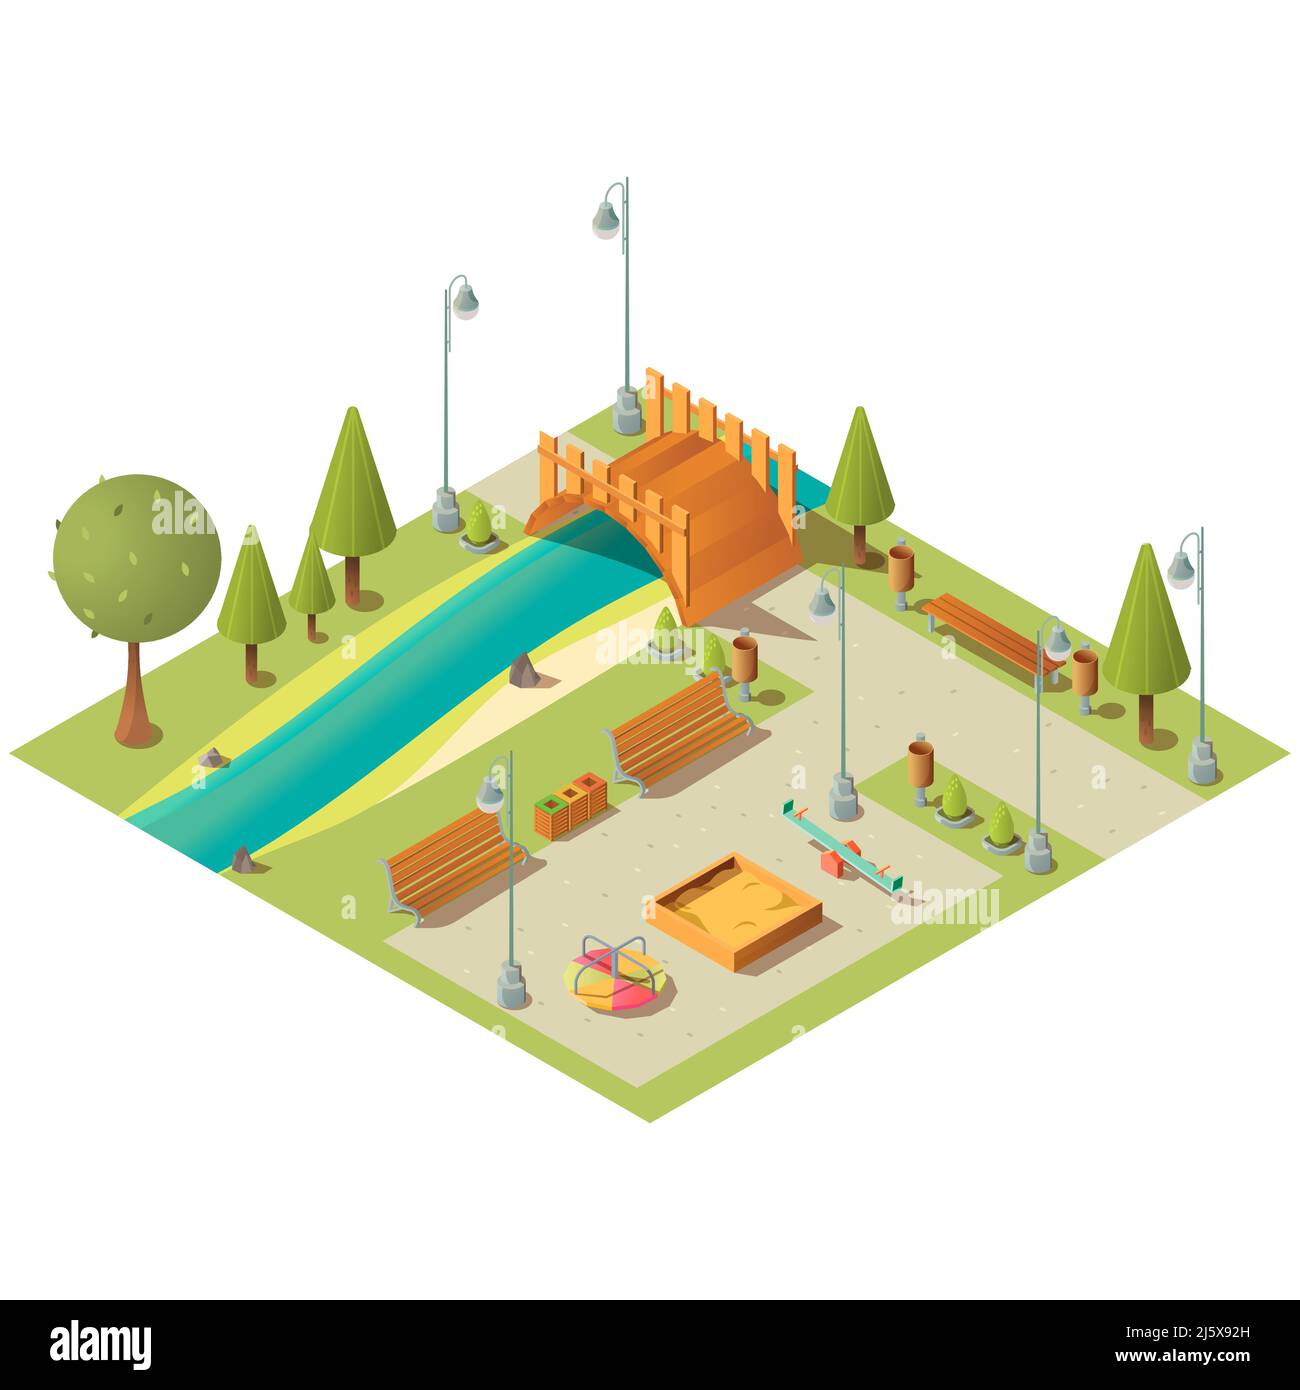 Isometric landscape of city green park with playground. Garden area with grass lawns, benches and bridge over river. Vector 3d carousel, seesaw swing Stock Vector